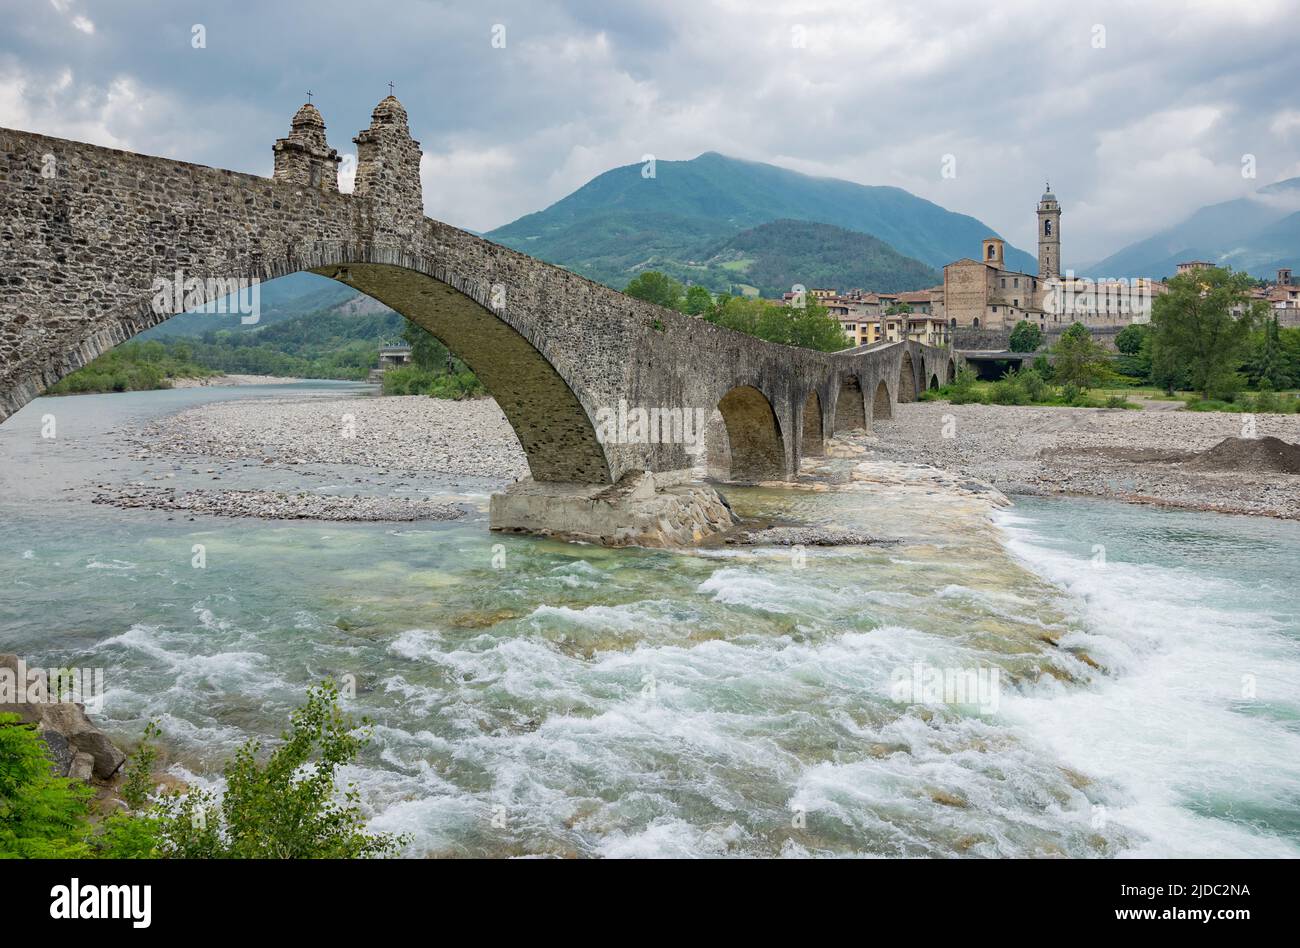 Bobbio, Italy , the Old Bridge (also known as the Devil's Bridge) over the Trebbia river, with the country in the background Stock Photo